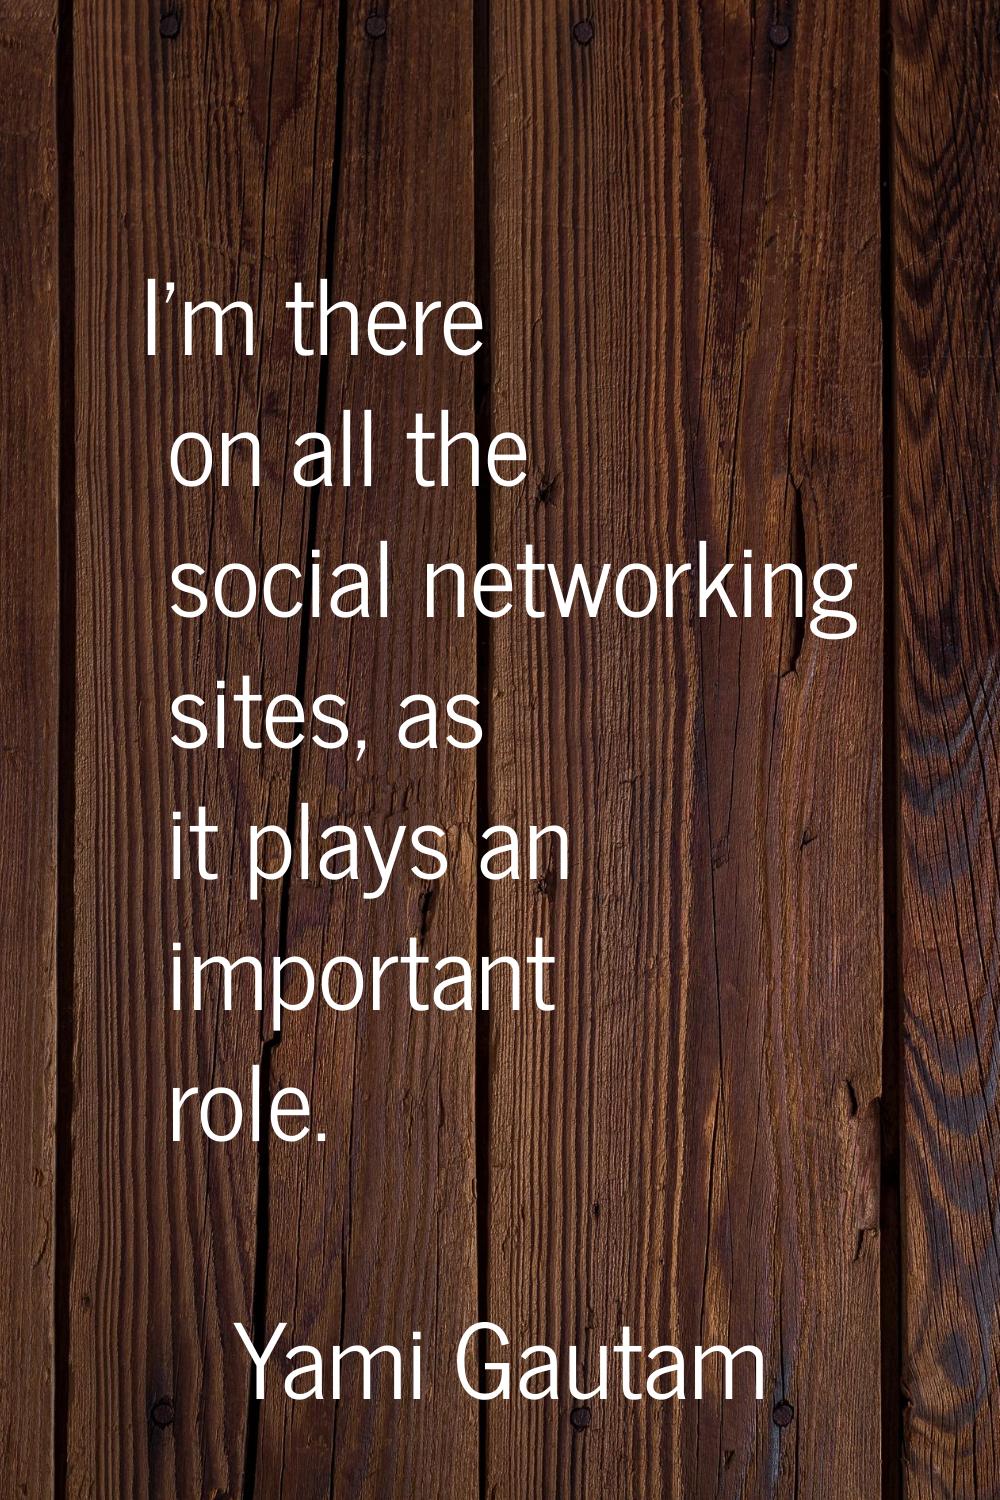 I'm there on all the social networking sites, as it plays an important role.